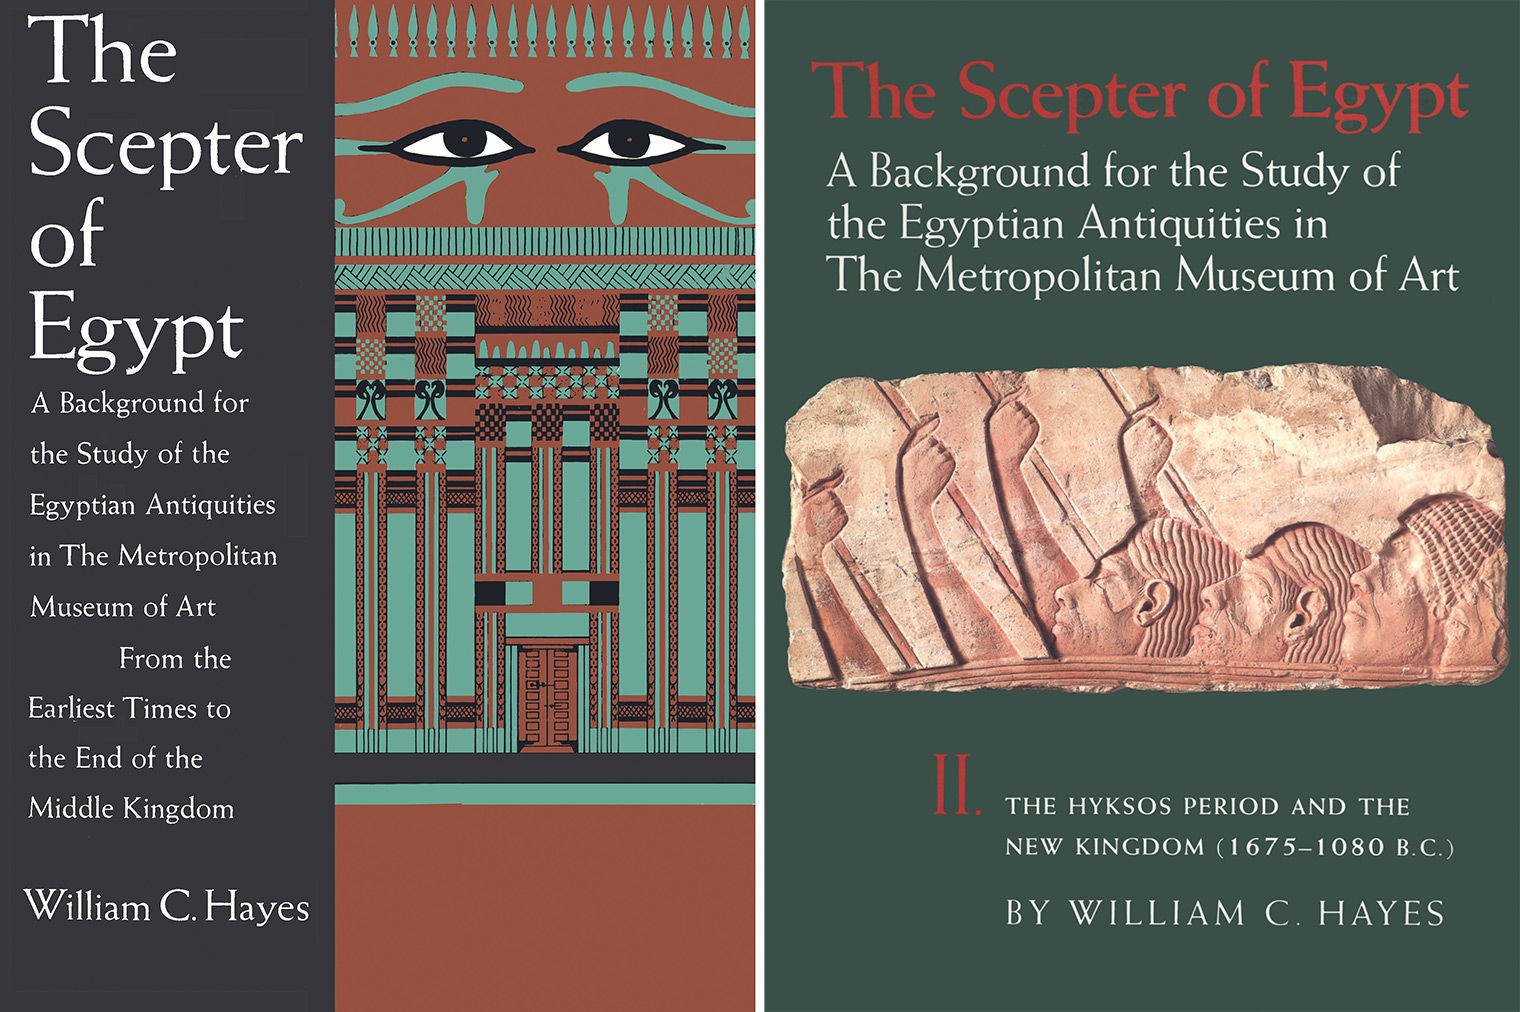 The covers of two books, The Scepter of Egypt part one and The Scepter of Egypt part 2.